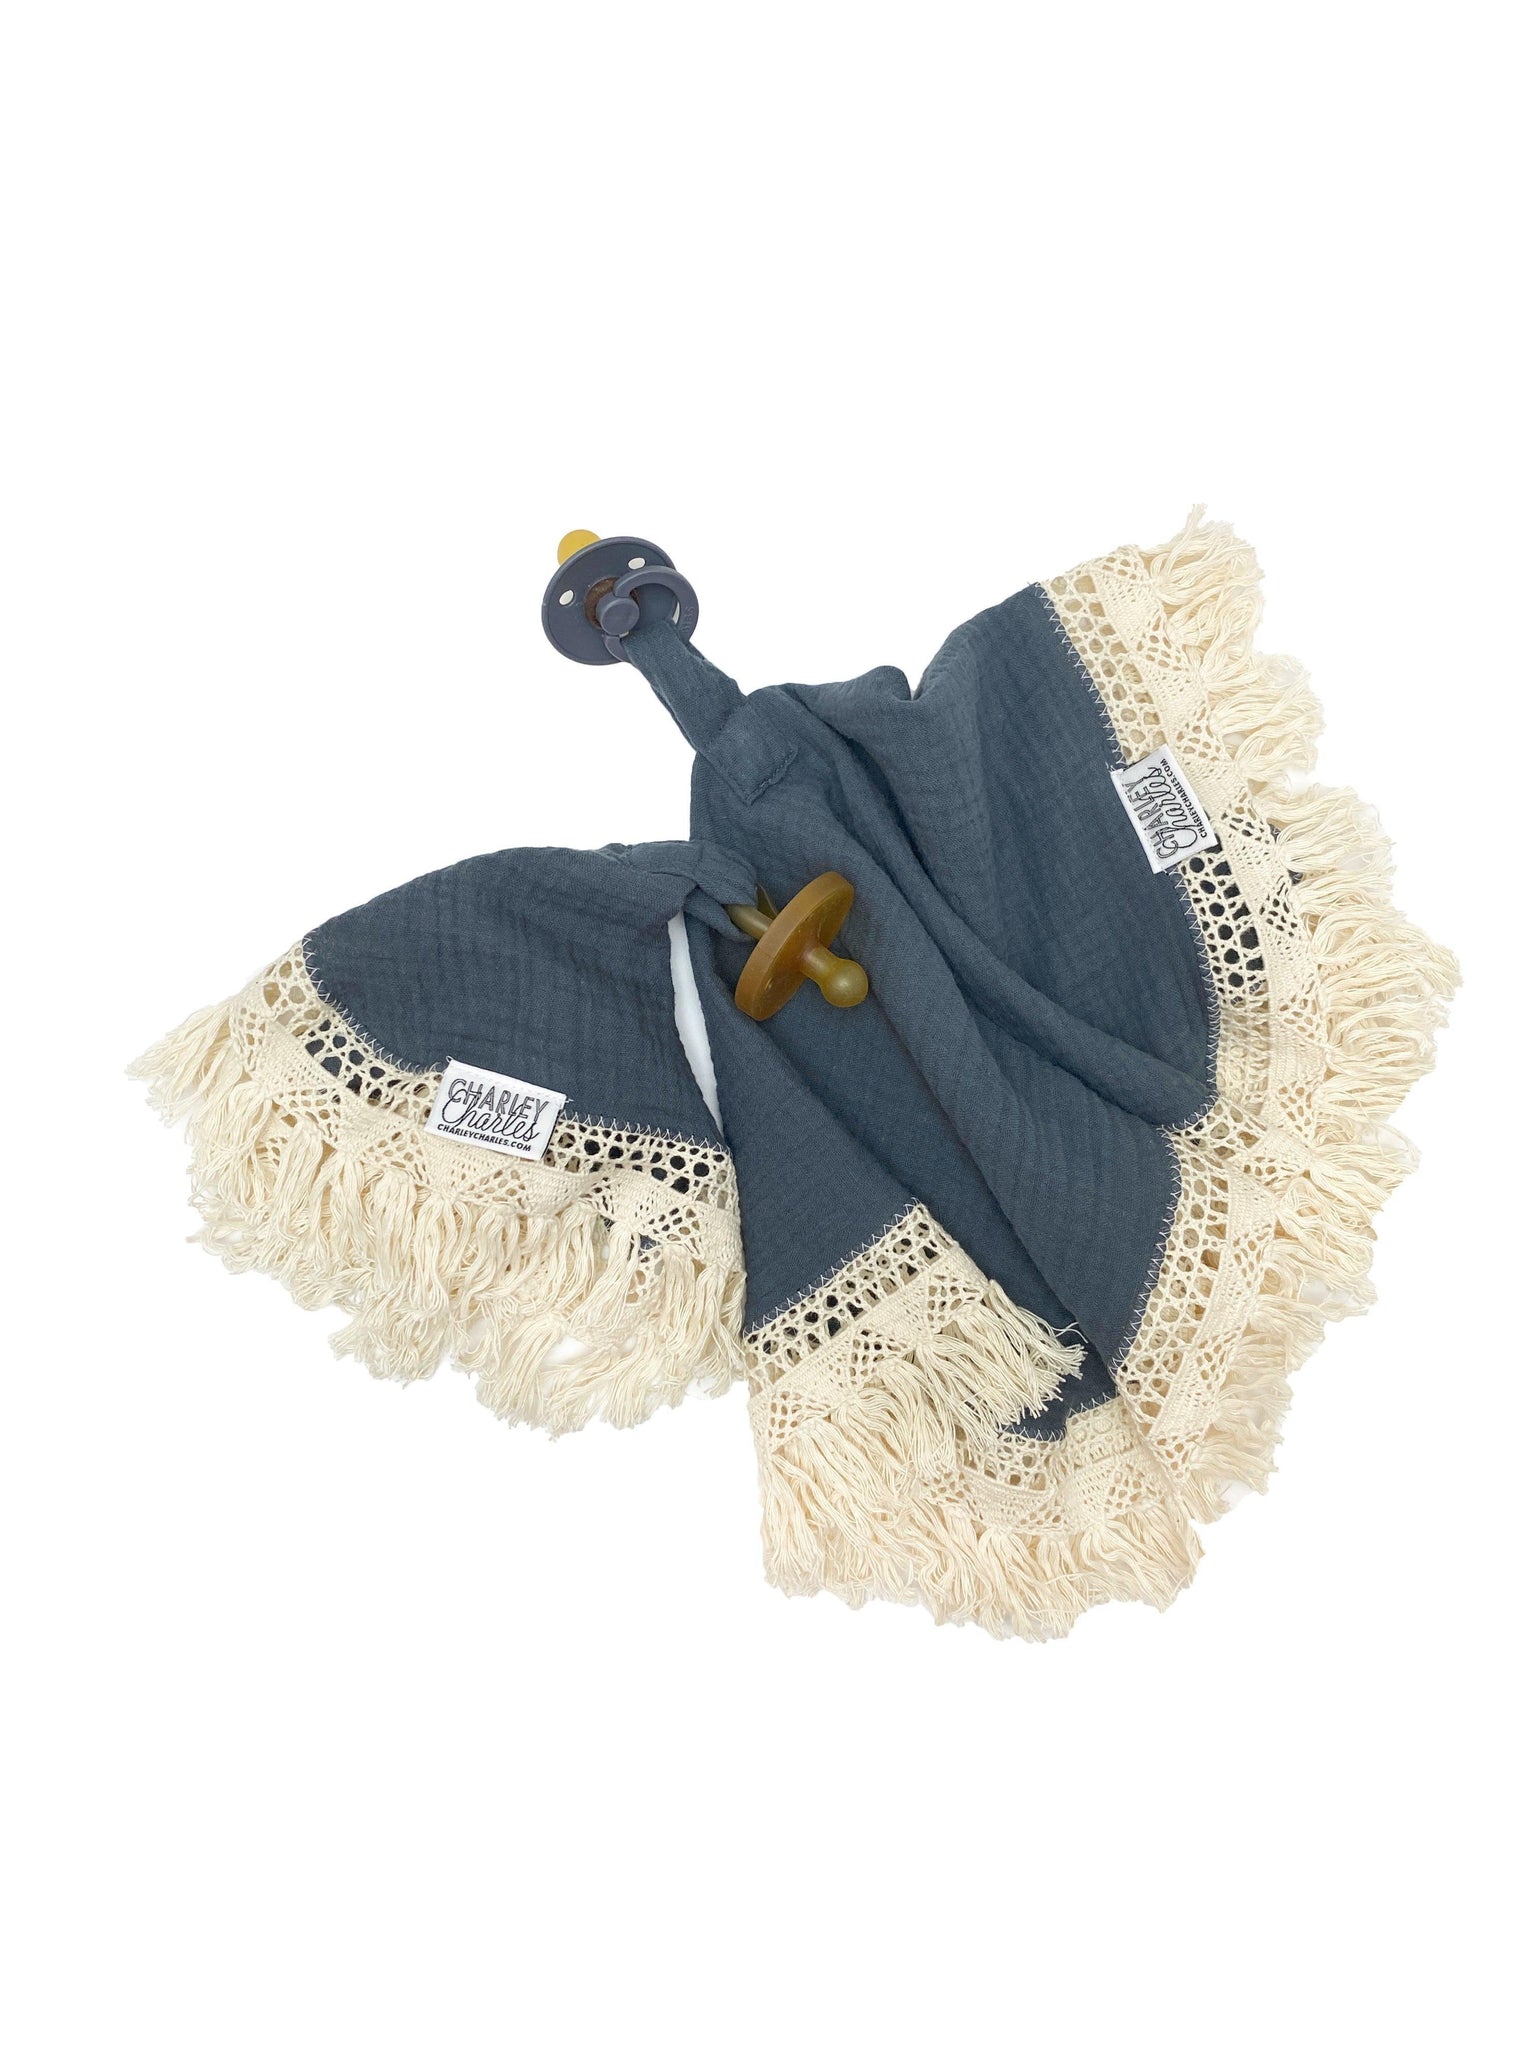 The Fringe Pacifier Blanket - 2 Sizes - MANY COLORS AVAILABLE - Charley Charles